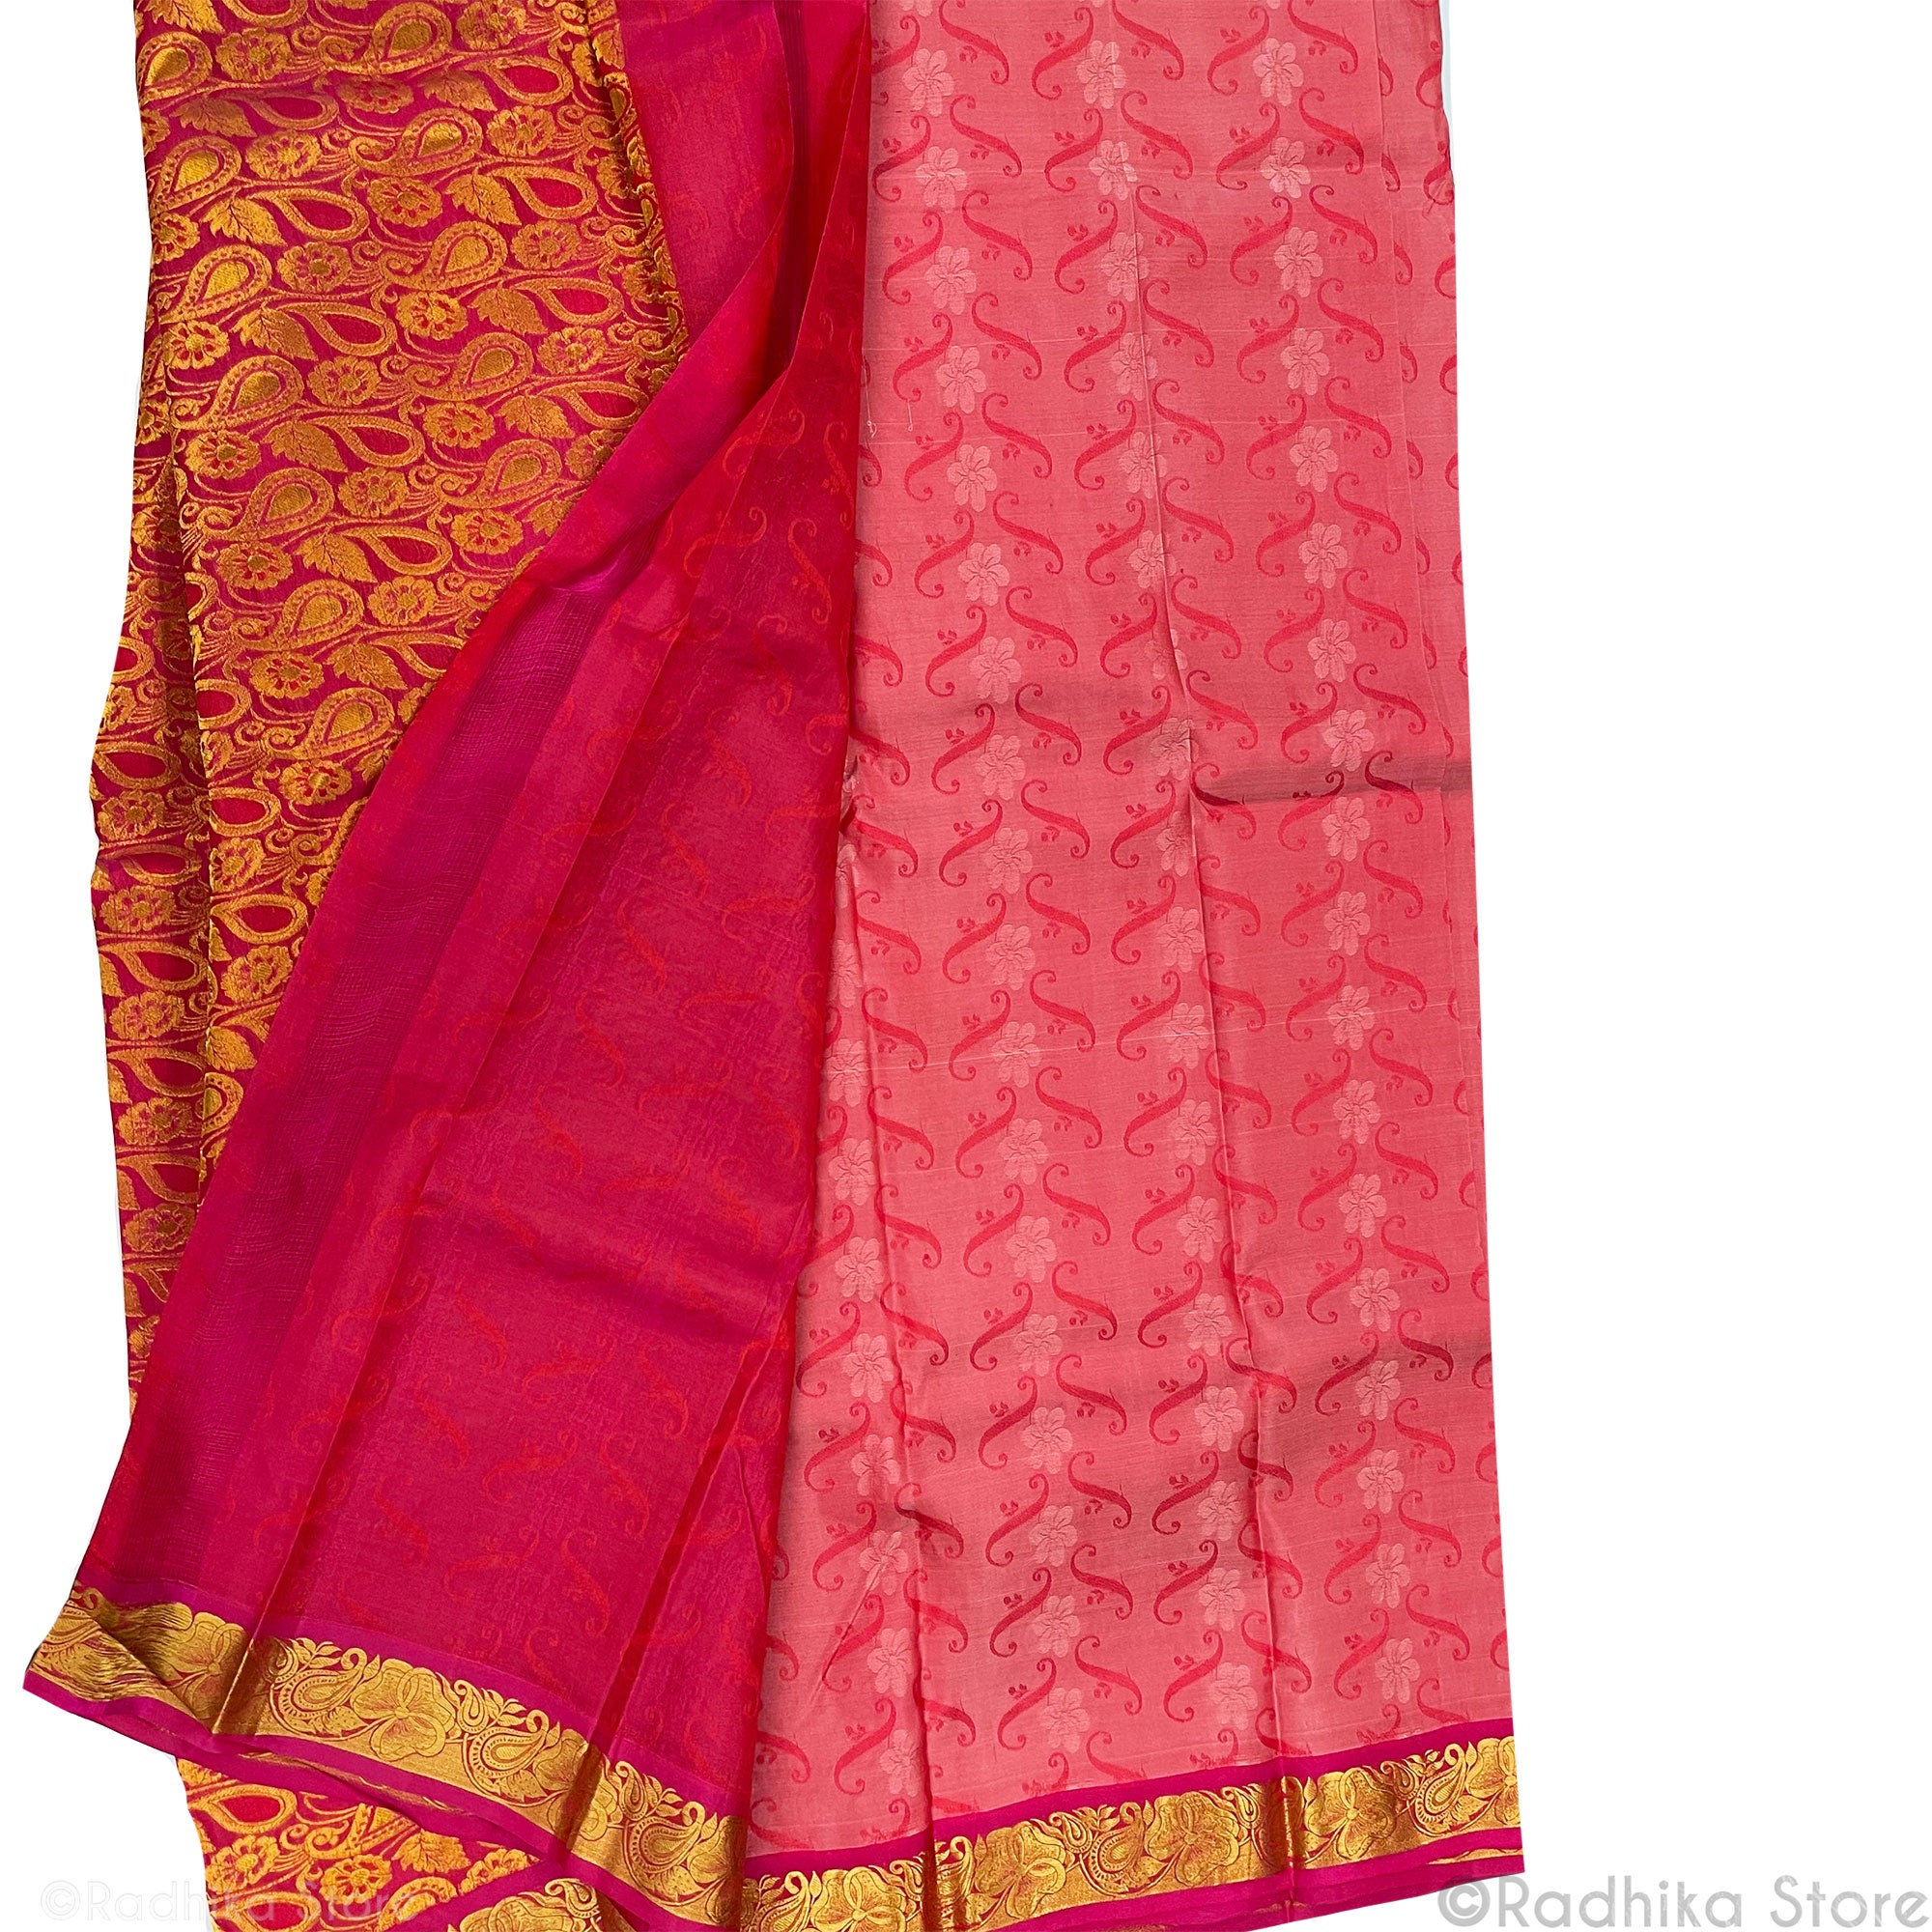 Vrindavan Flowers and Chandrikas Cranberry and Coral Reds - Quality Silk Saree